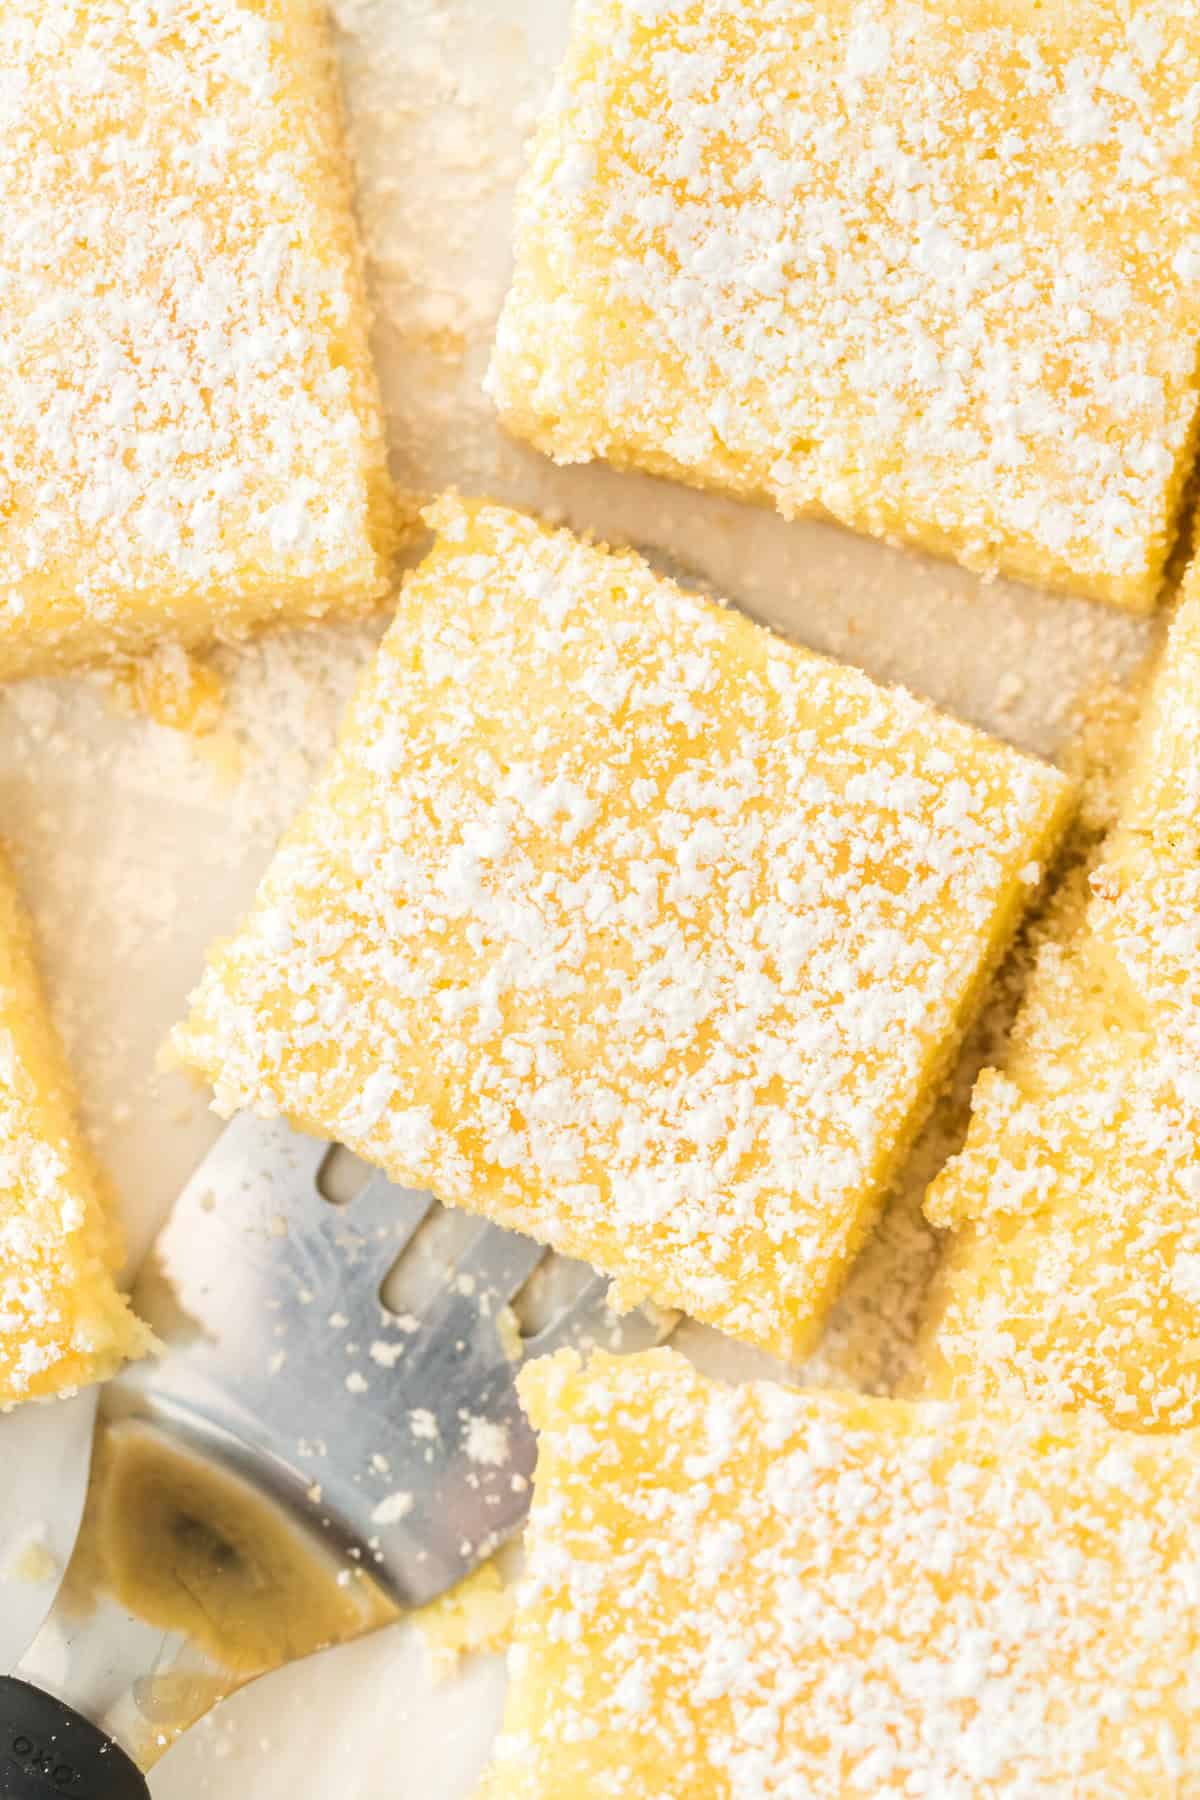 Slices of ooey gooey butter cake with powdered sugar overhead with a spatula serving one